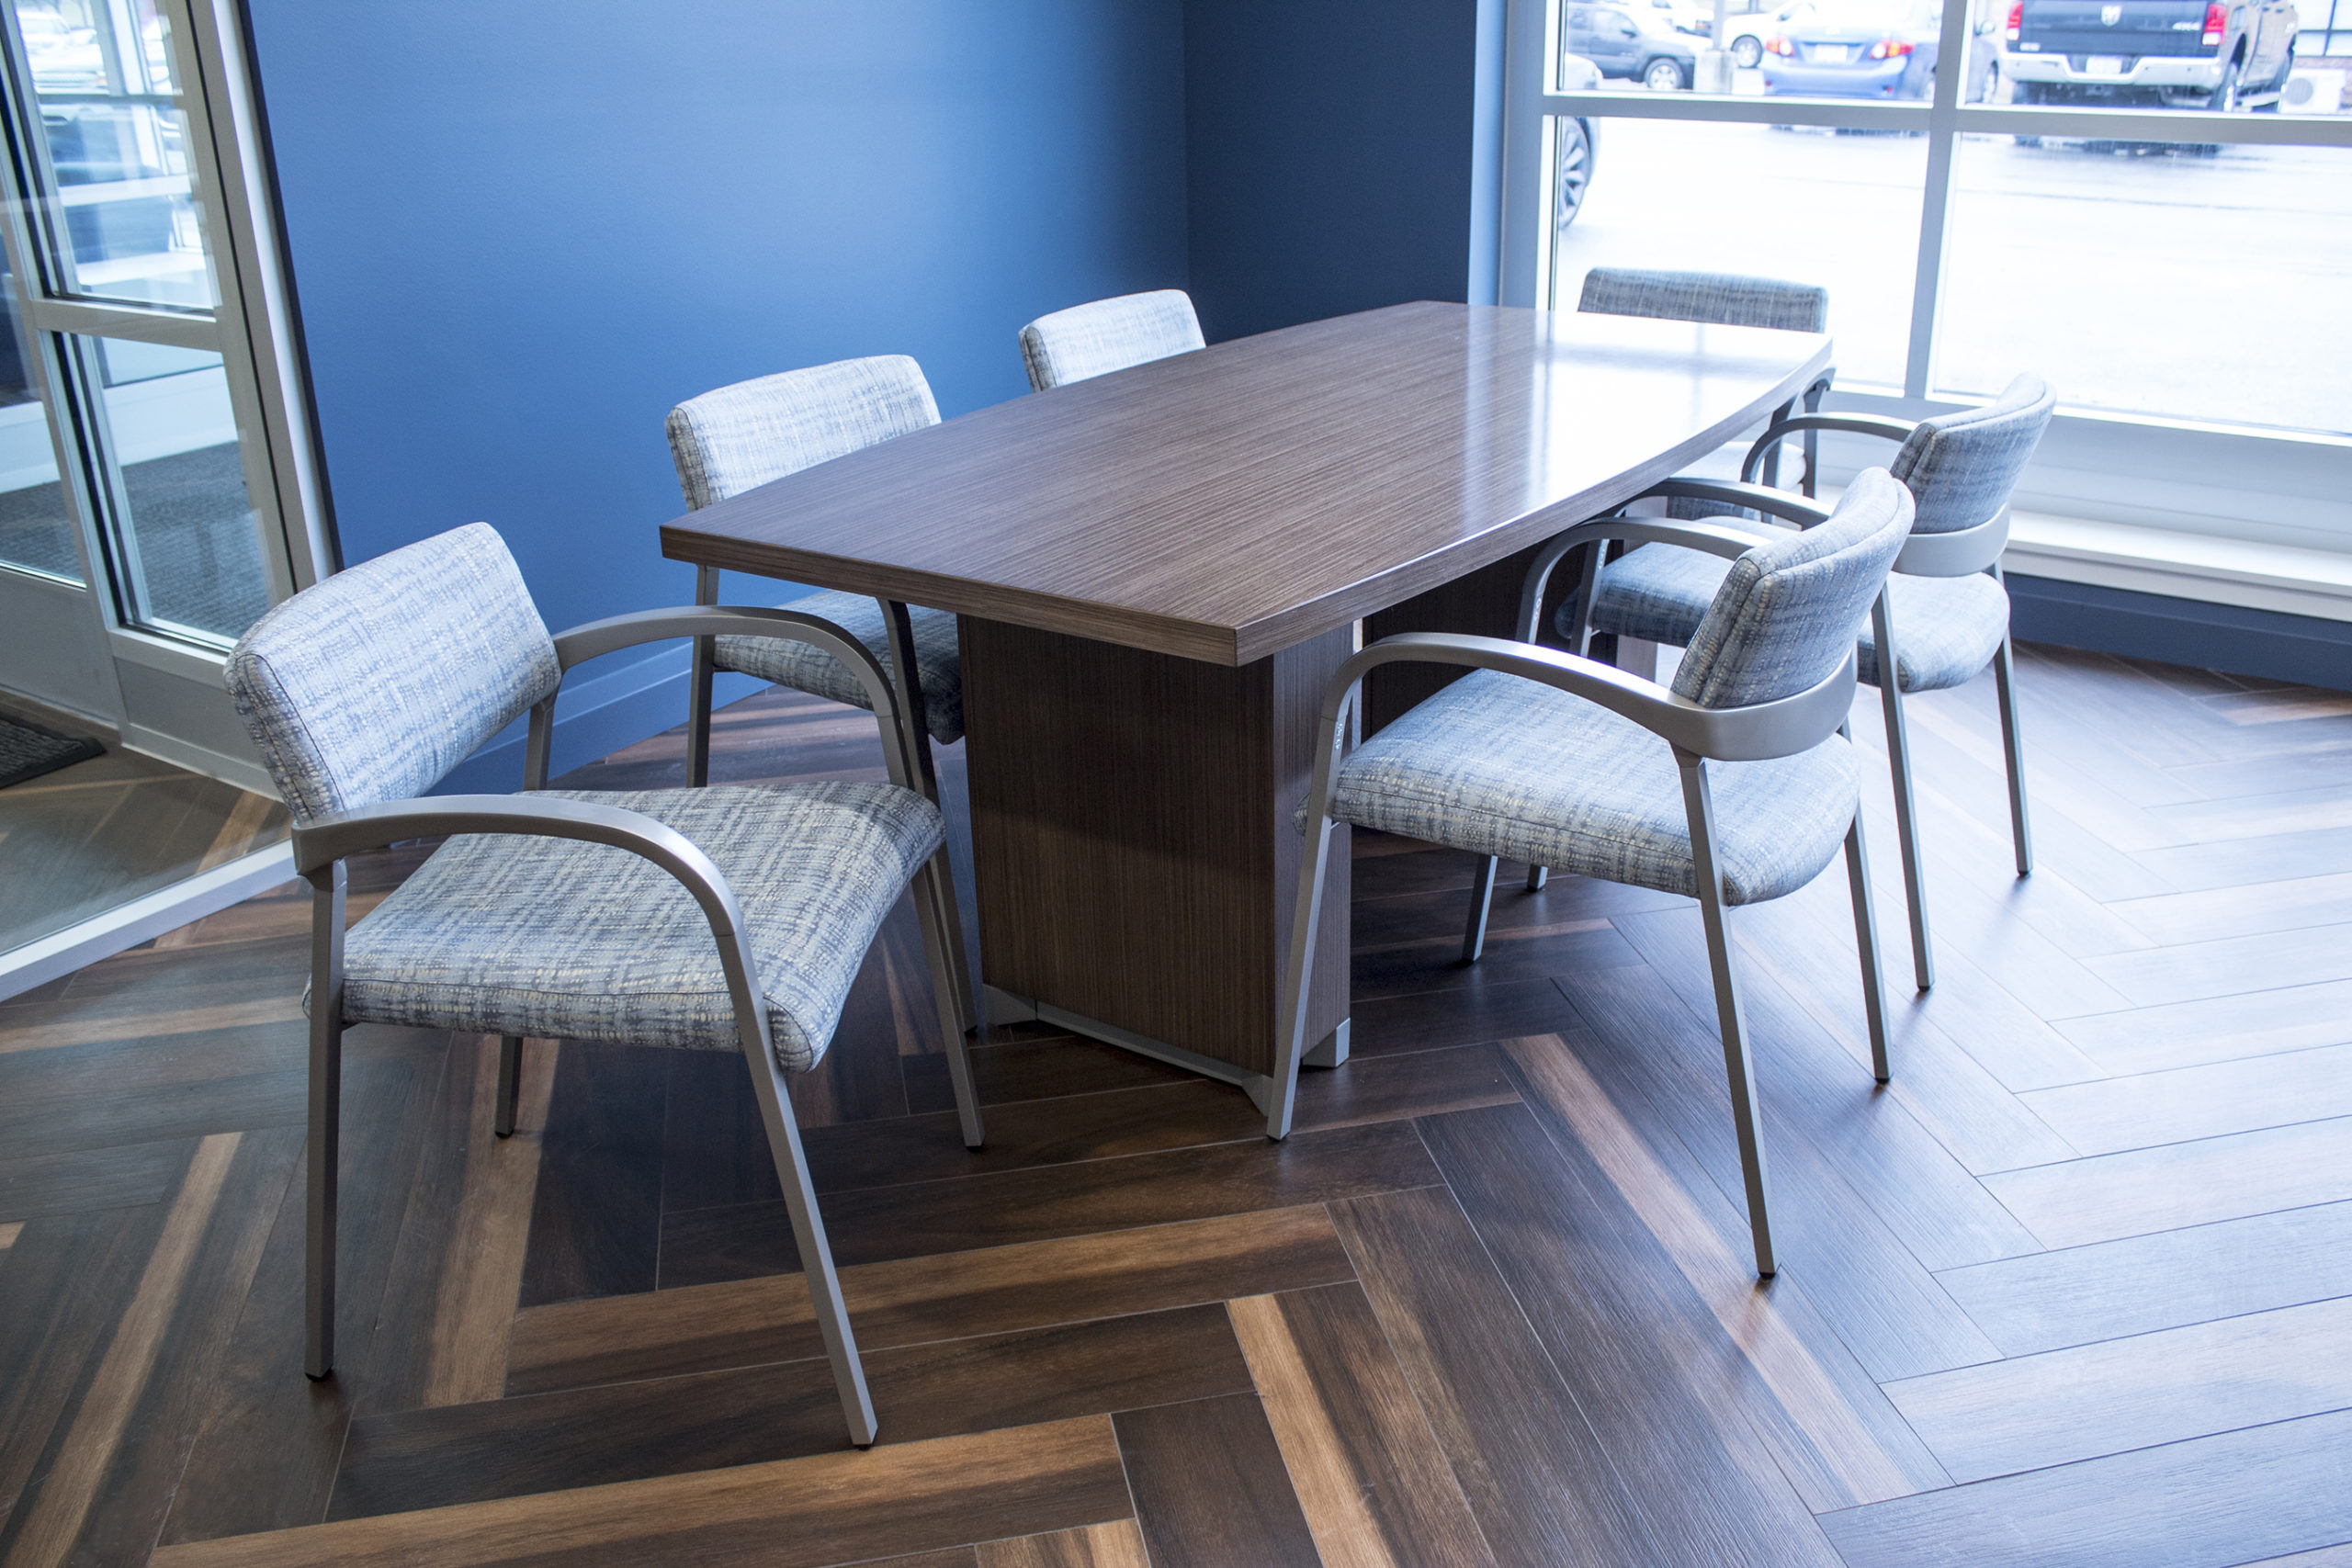 Transteck Executive Office Conference Table and Chairs